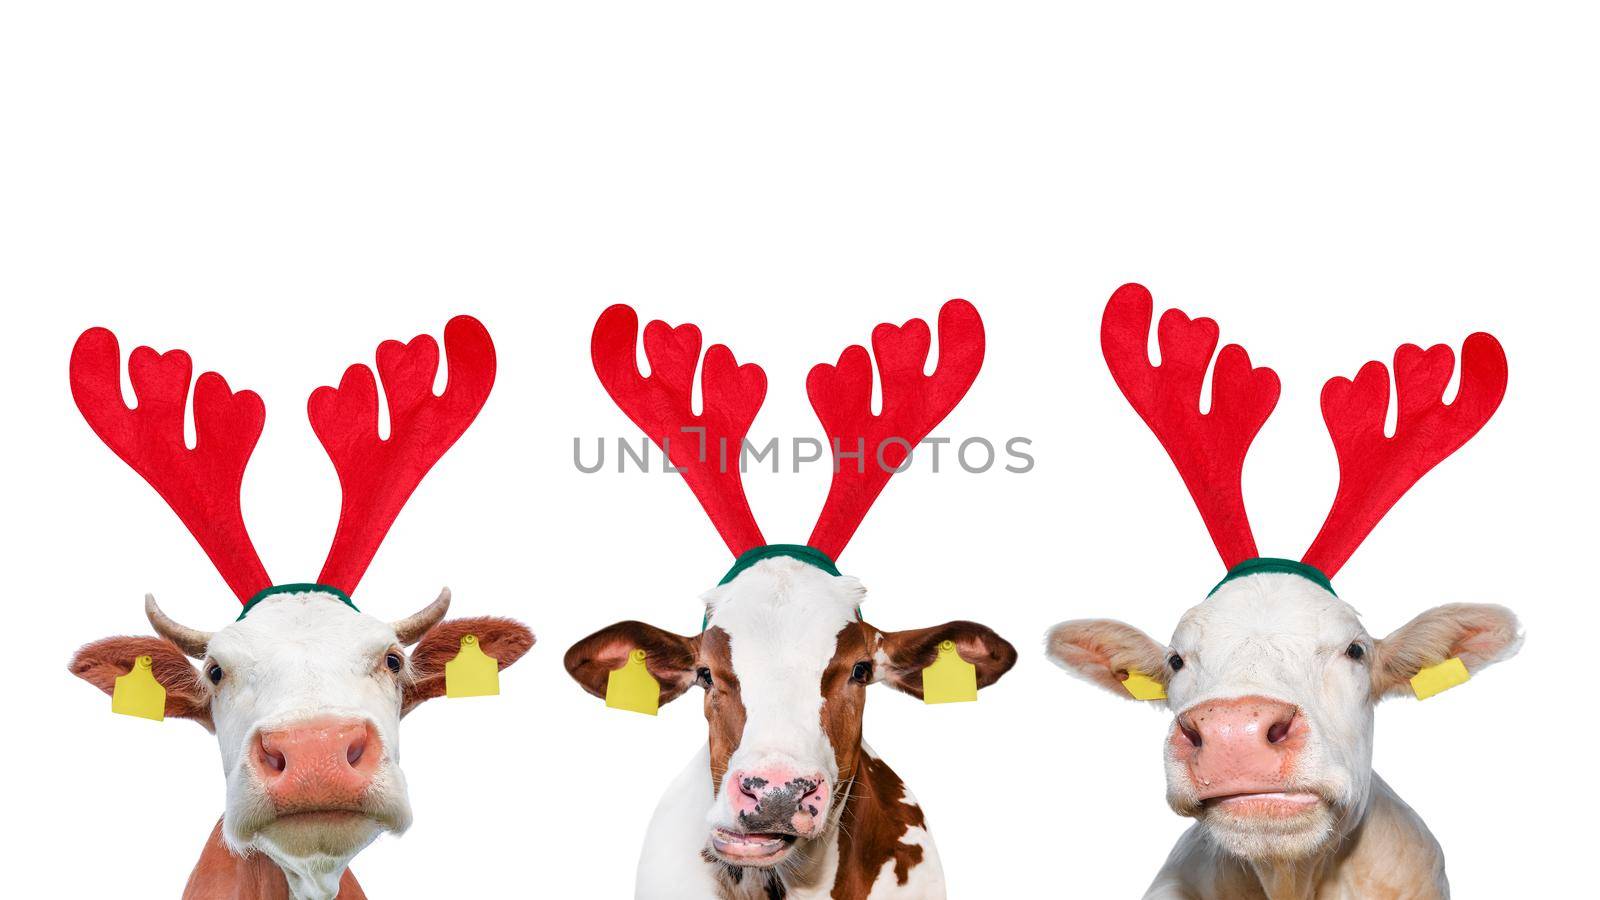 Christmas funny cow isolated on white background. Portrait of three Cows in Christmas Reindeer Antlers Headband